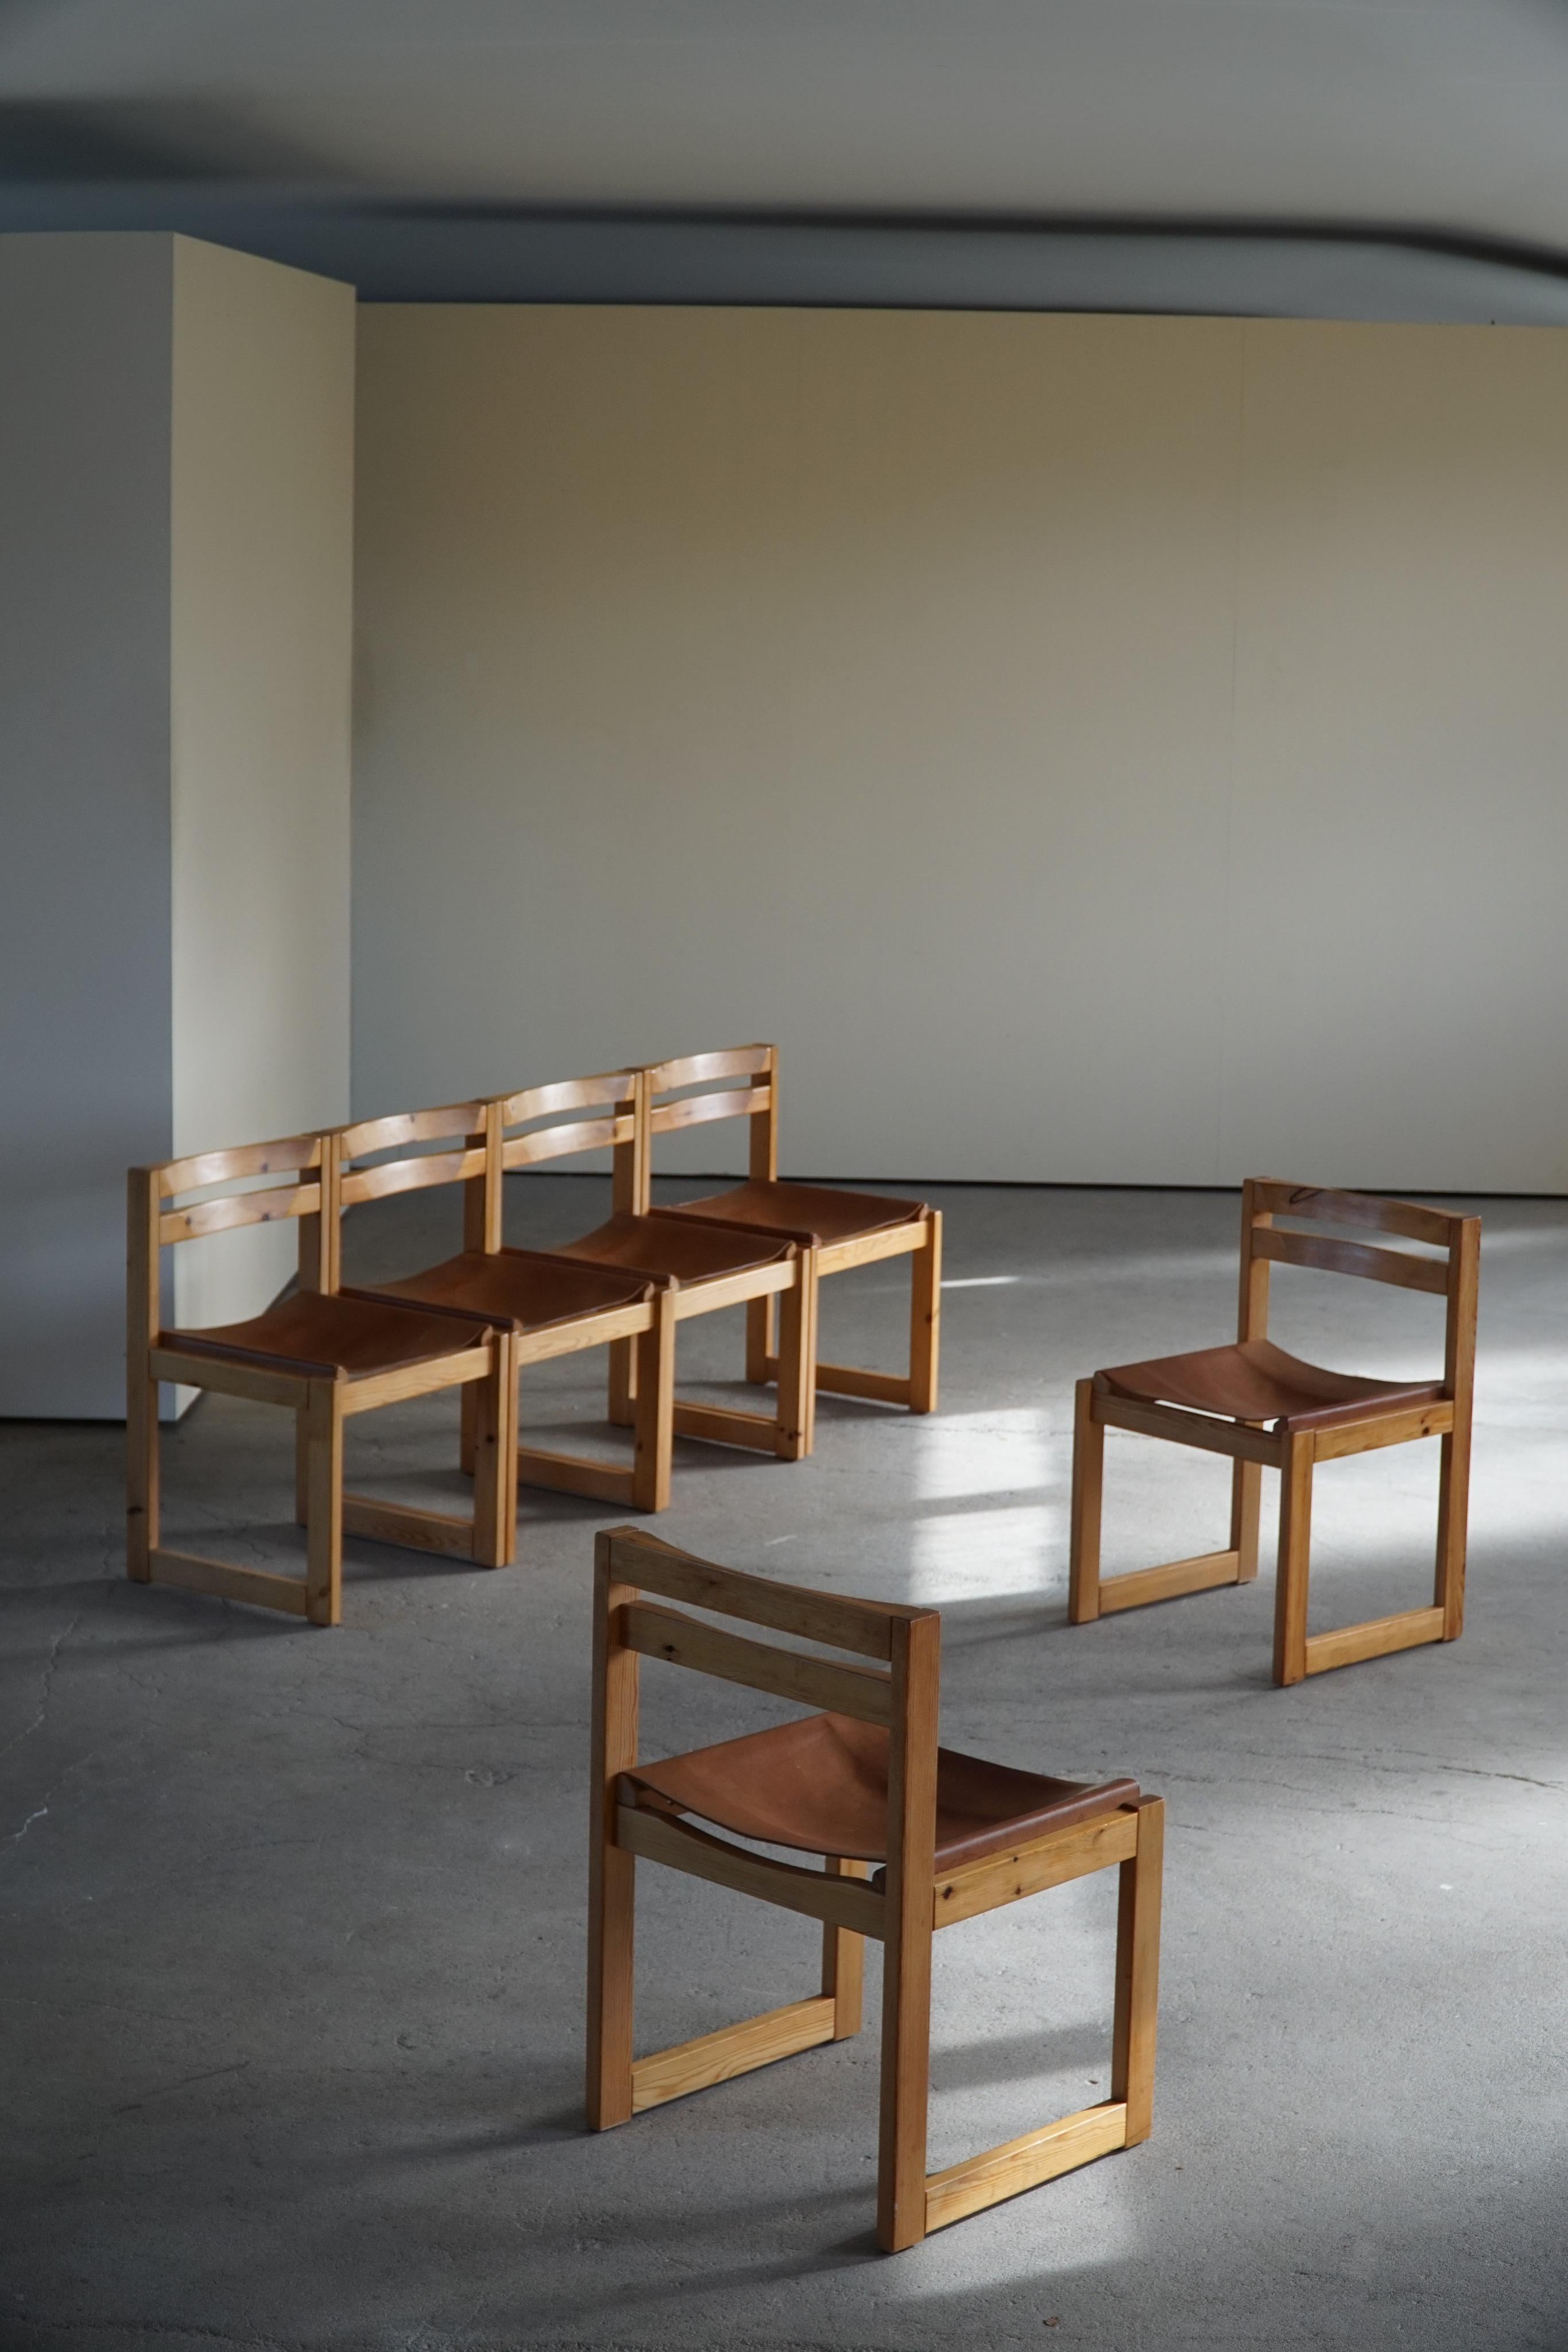 Brutalist Set of 6 Dining Chairs in Pine and Leather by Knud Færch, Danish Modern, 1970s